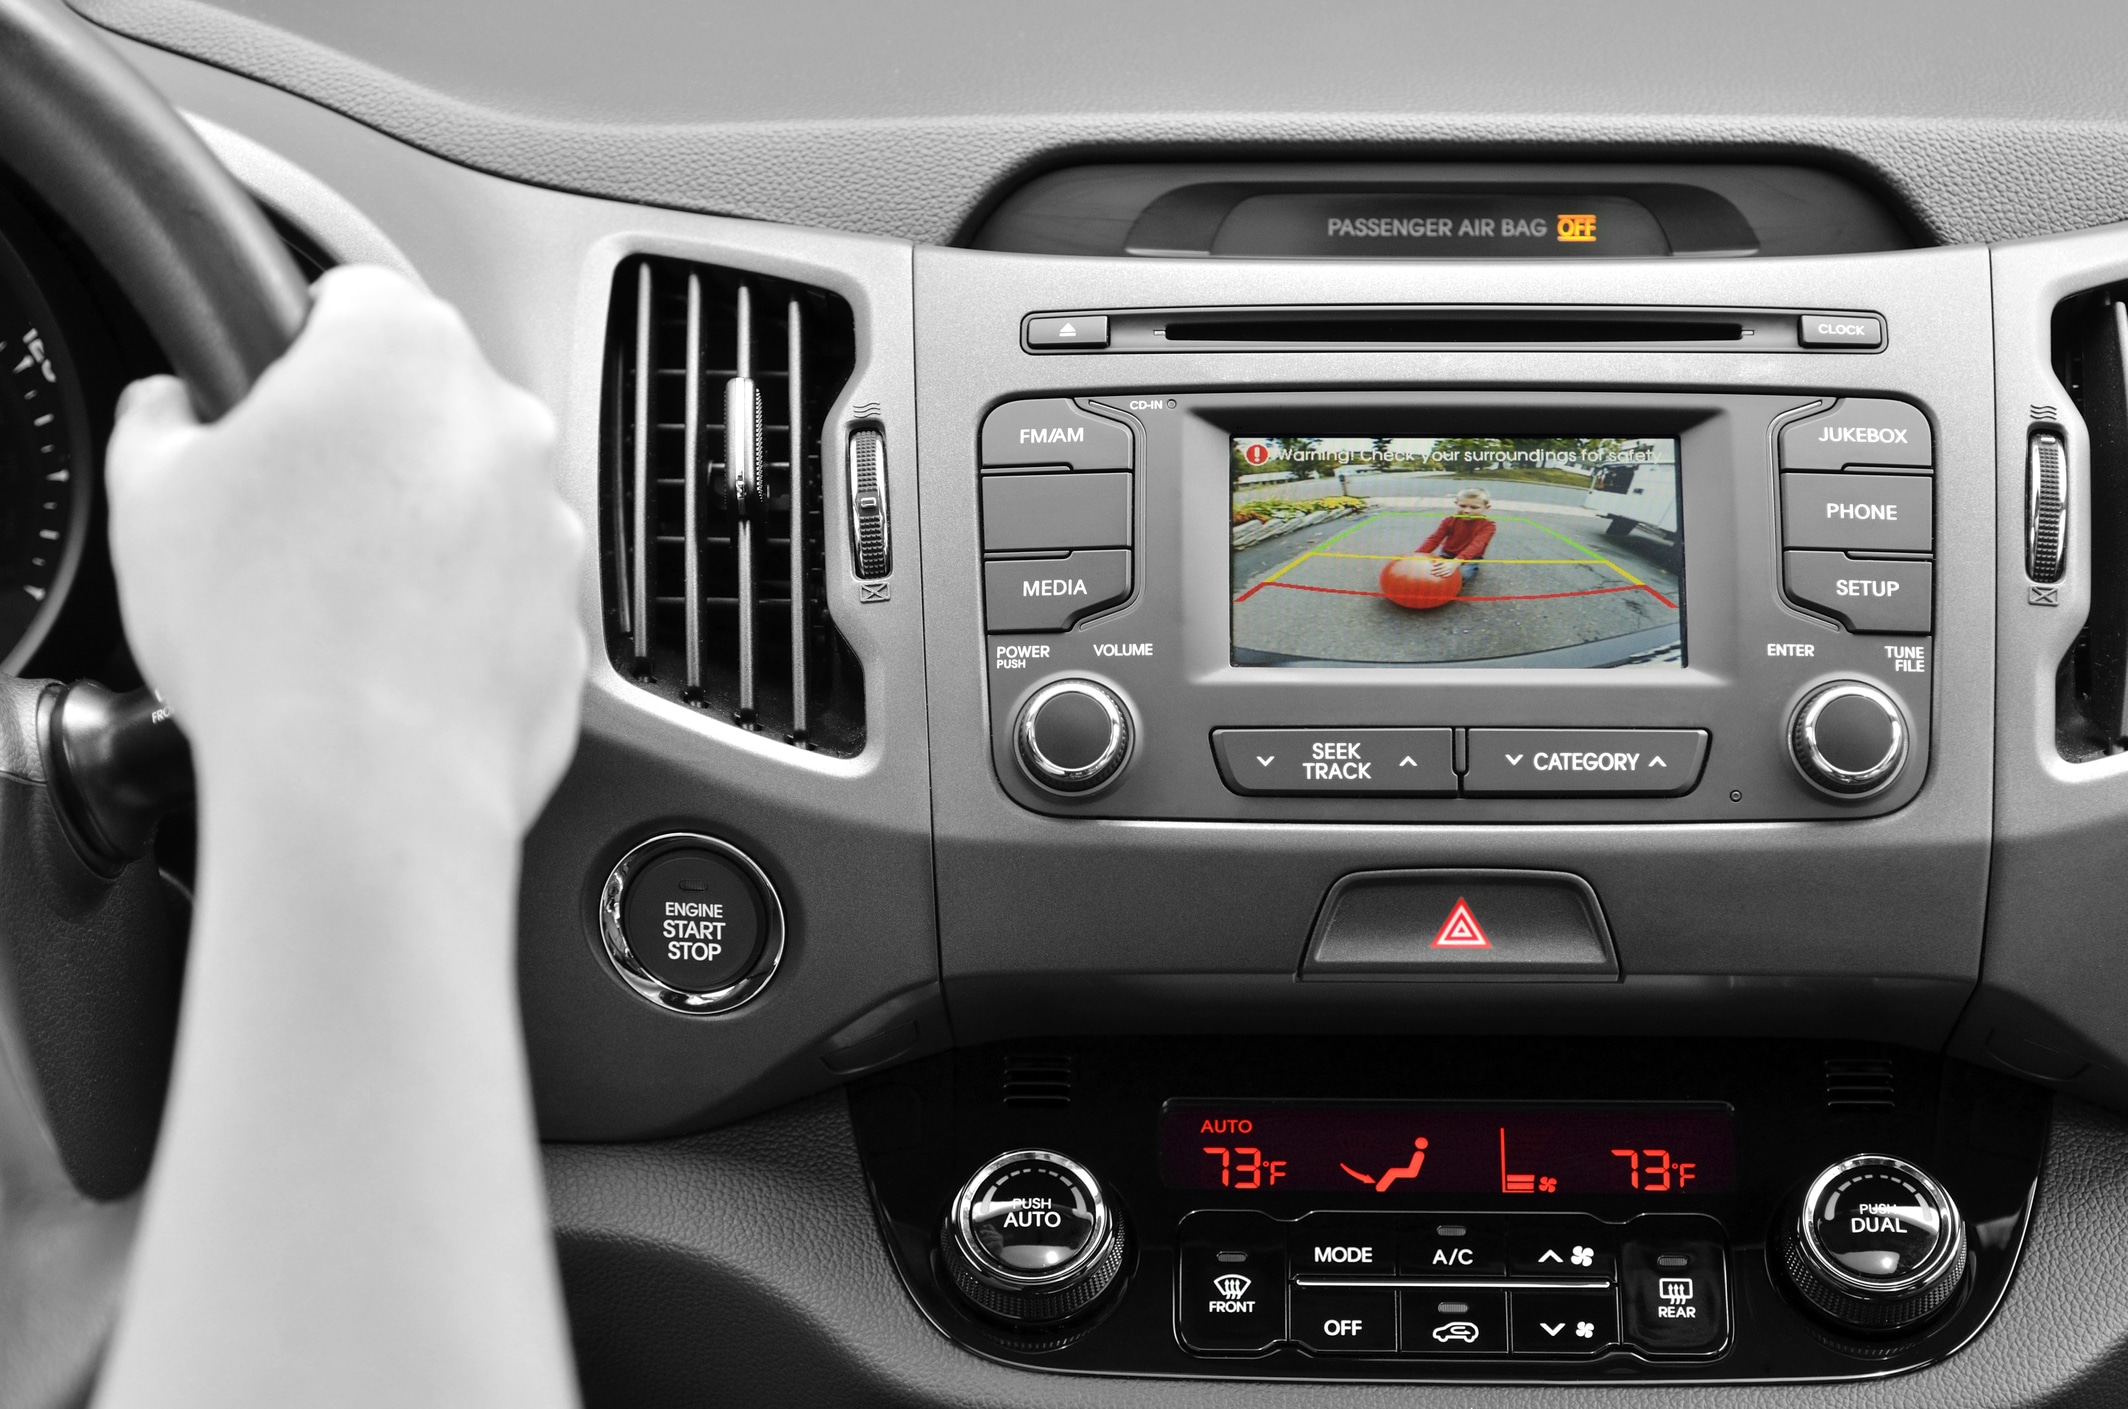 Get the Facts: Do Rearview Cameras Really Help Prevent Vehicle Accidents in California?